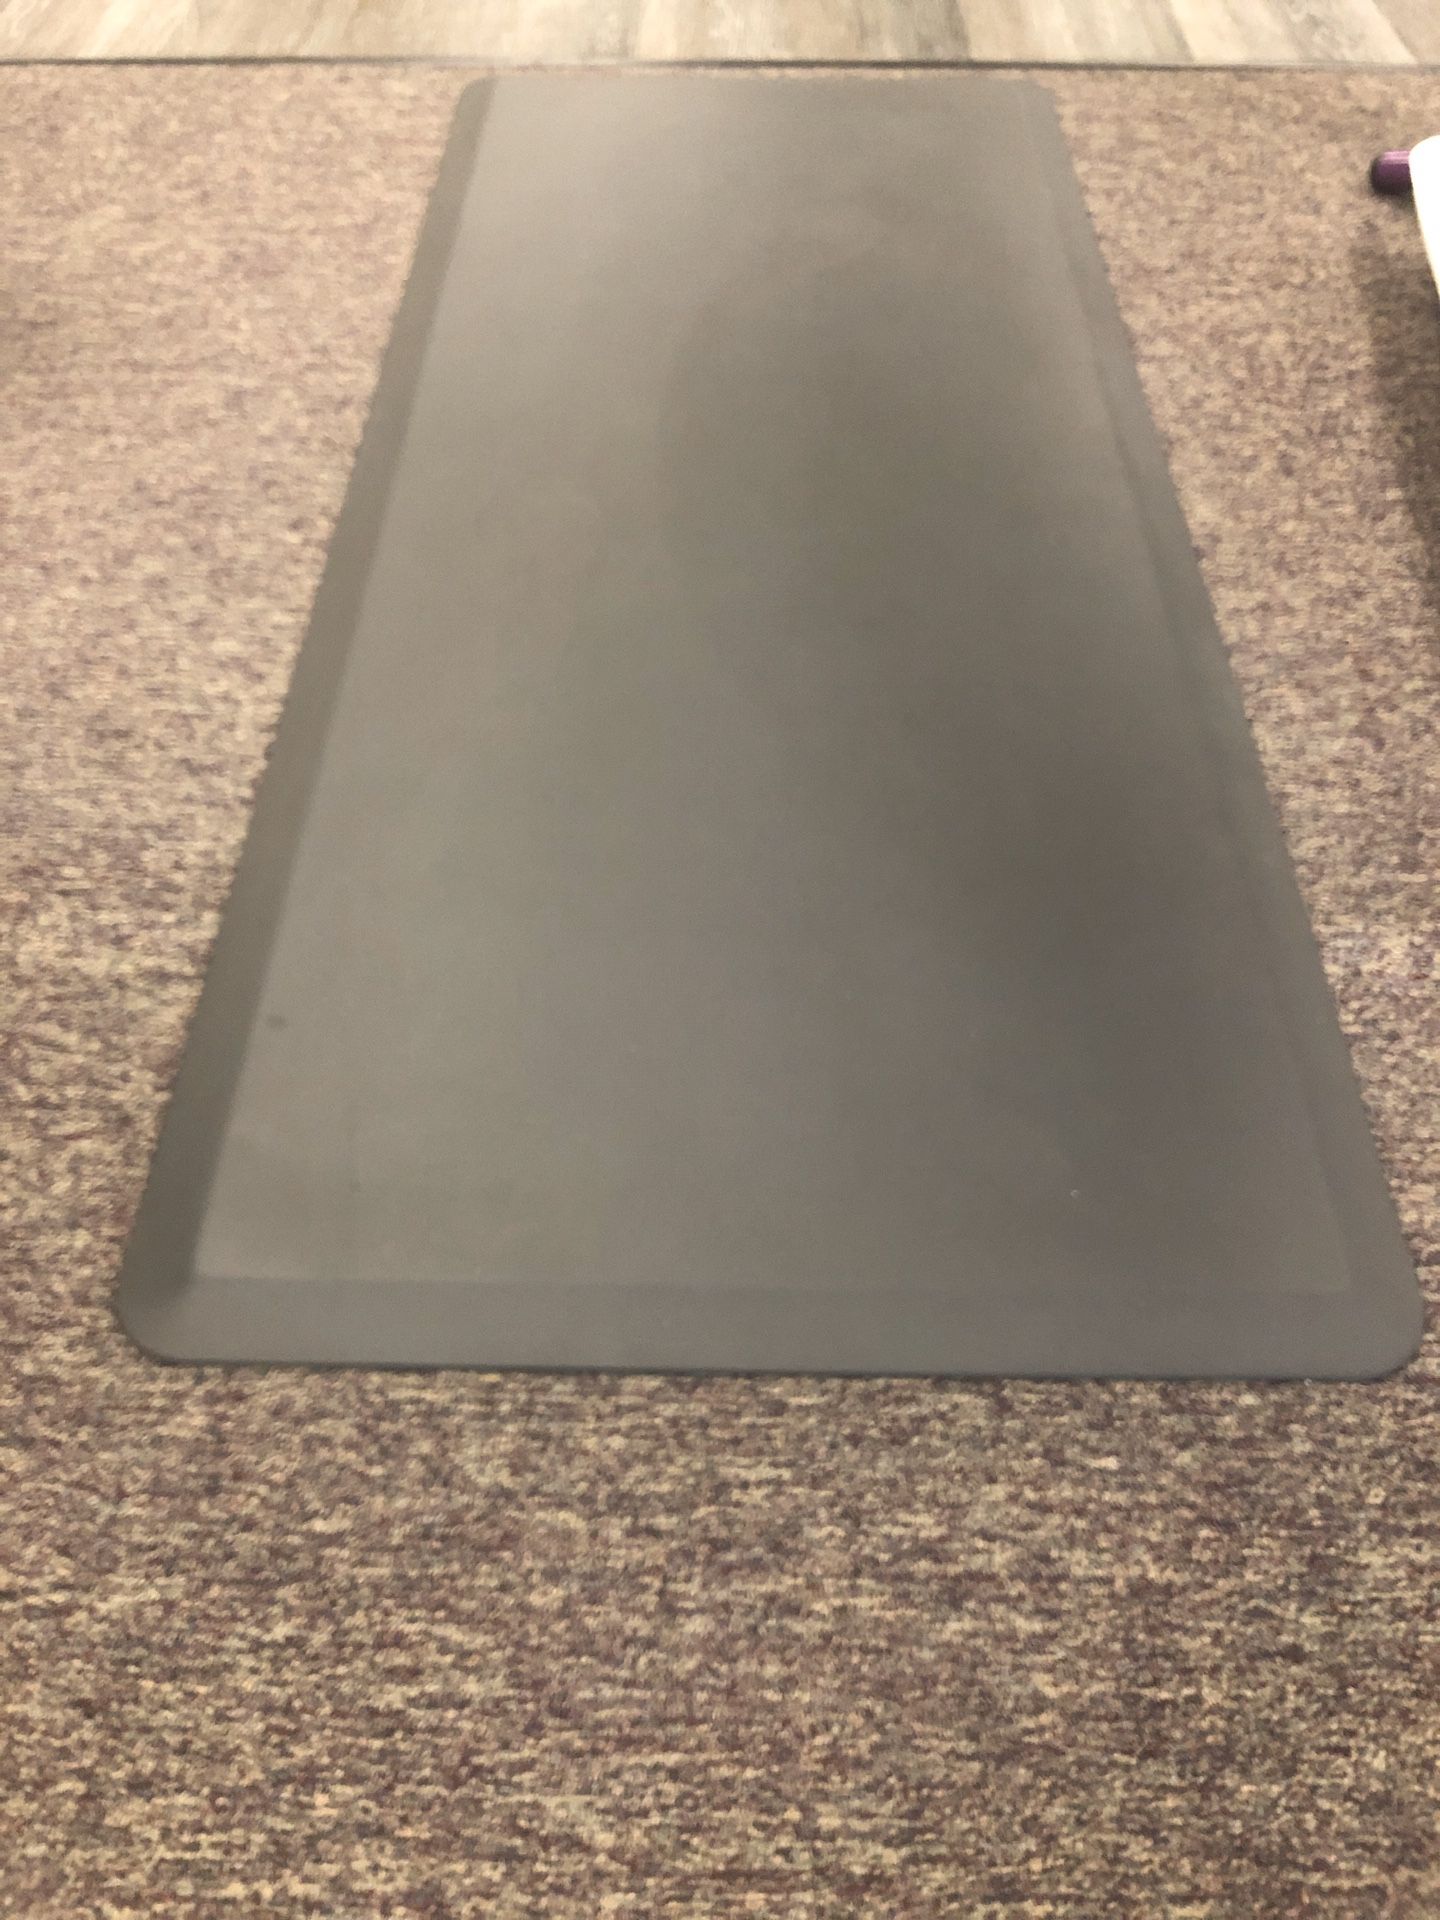 Exercise Mat (quantity available = 8)